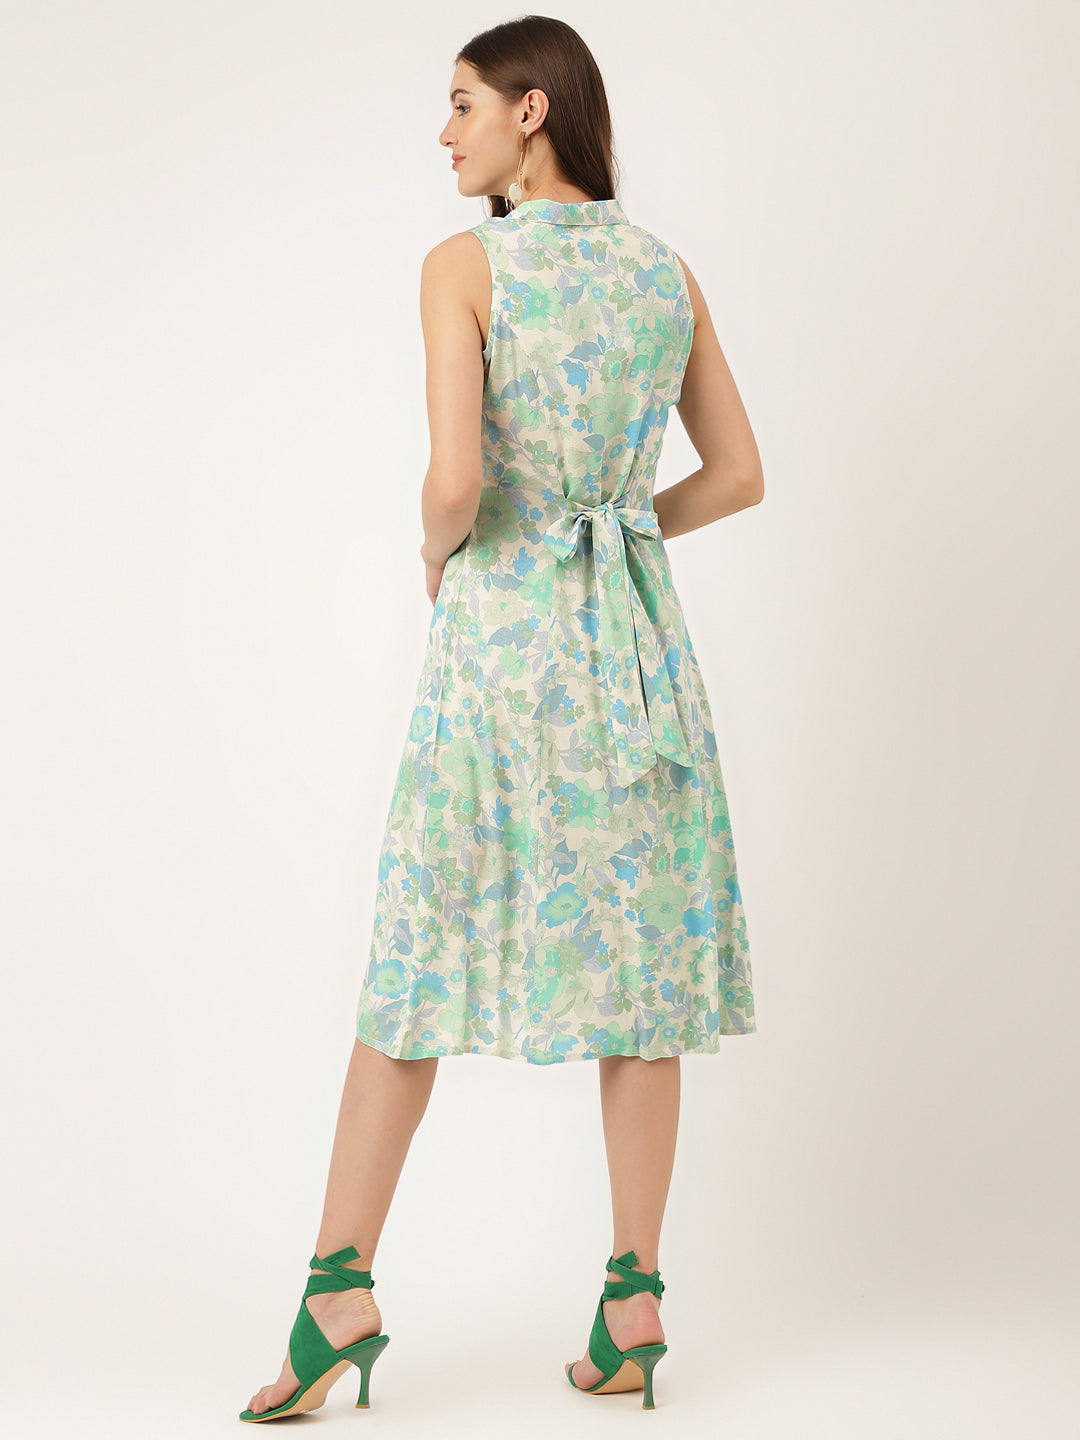 Divena Green Floral Print Rayon A-Line Midi Dress with Attached Sleeves for Women